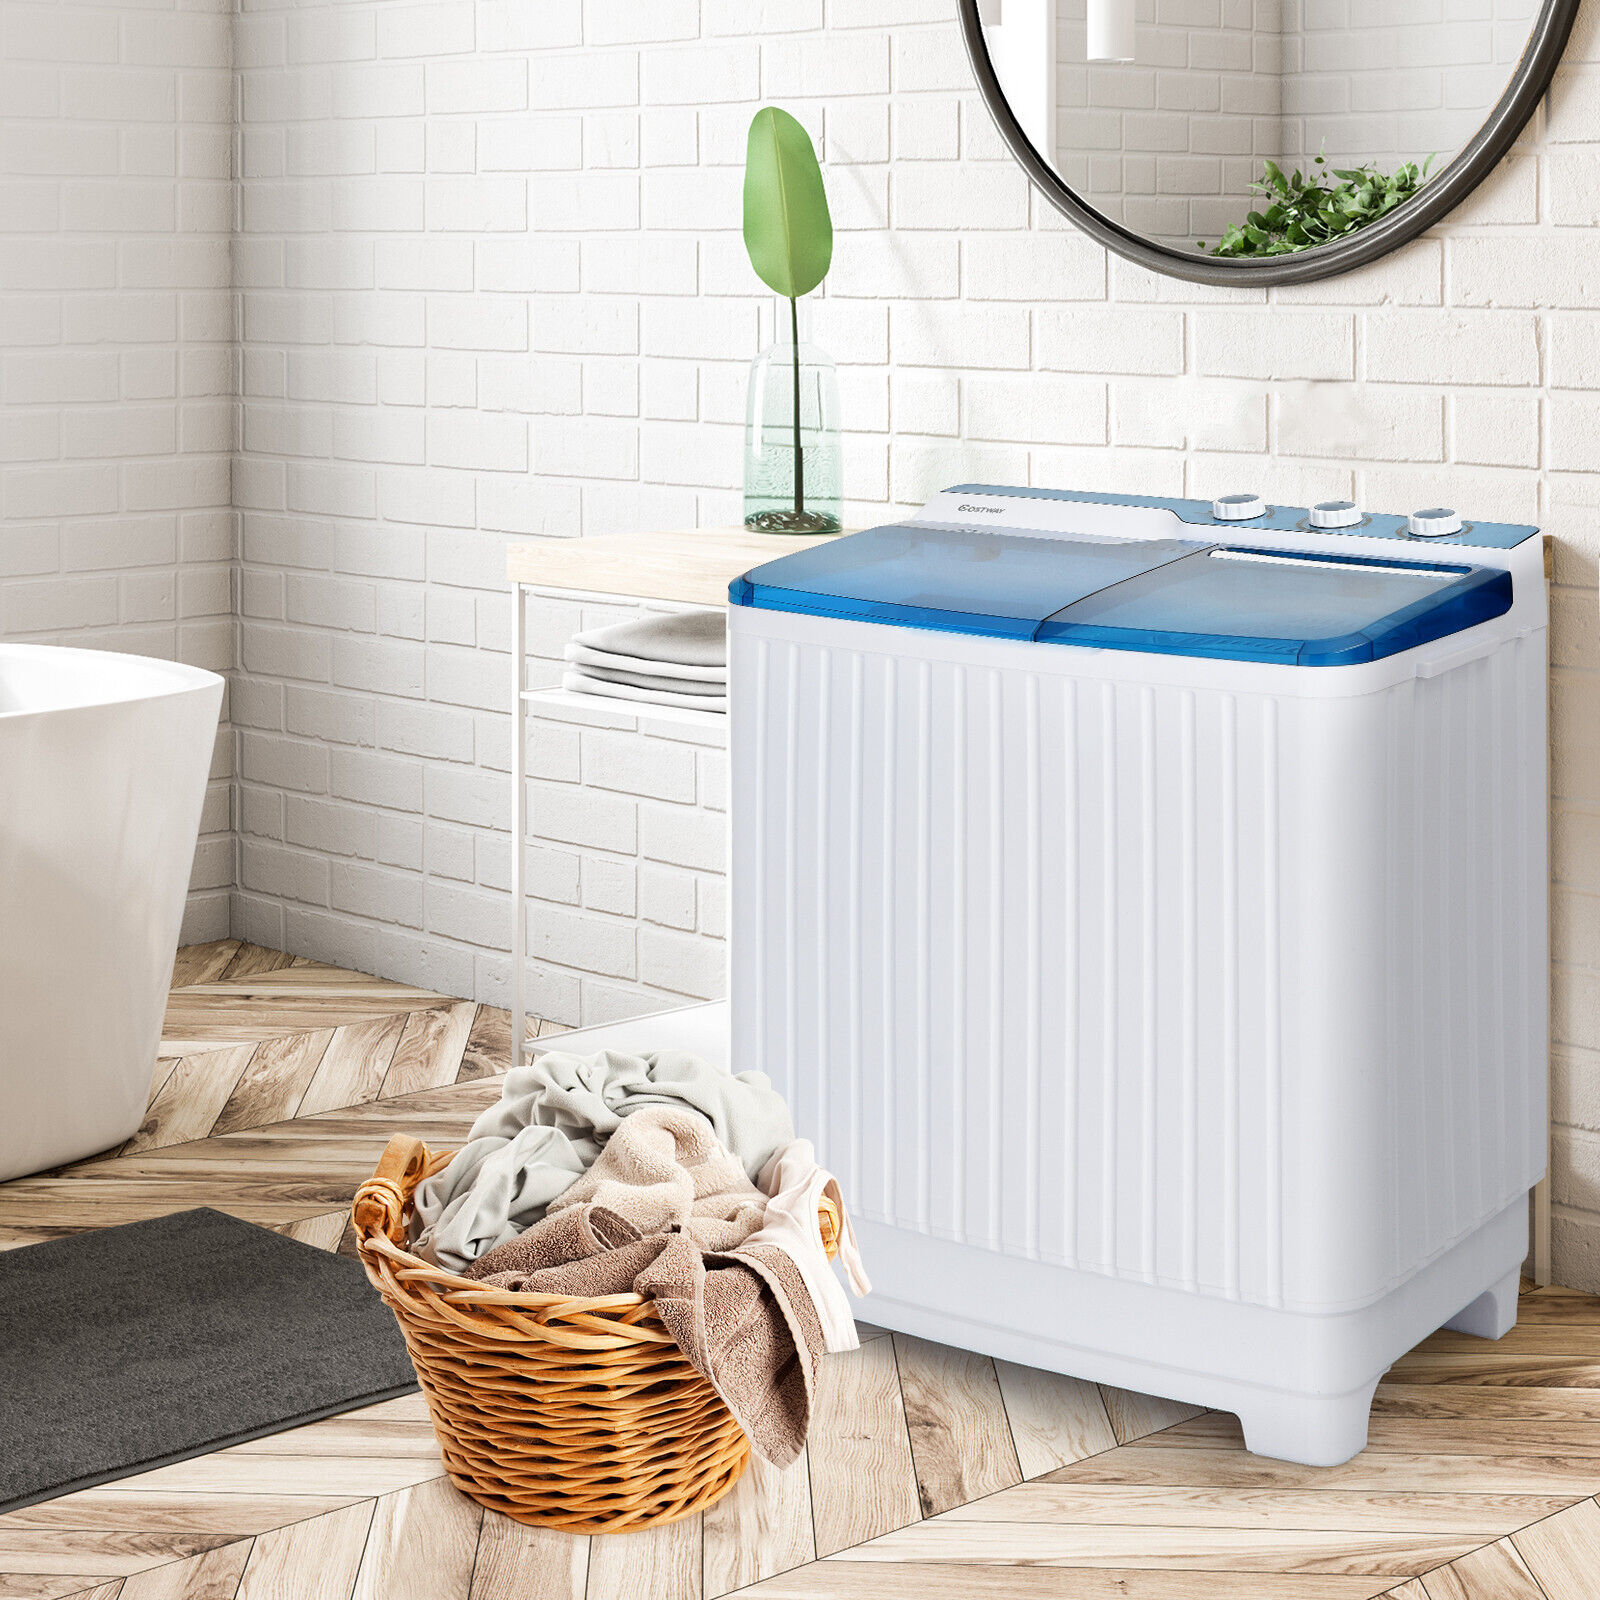 Portable Twin Tub Washer Dryer 10.5KG Capacity